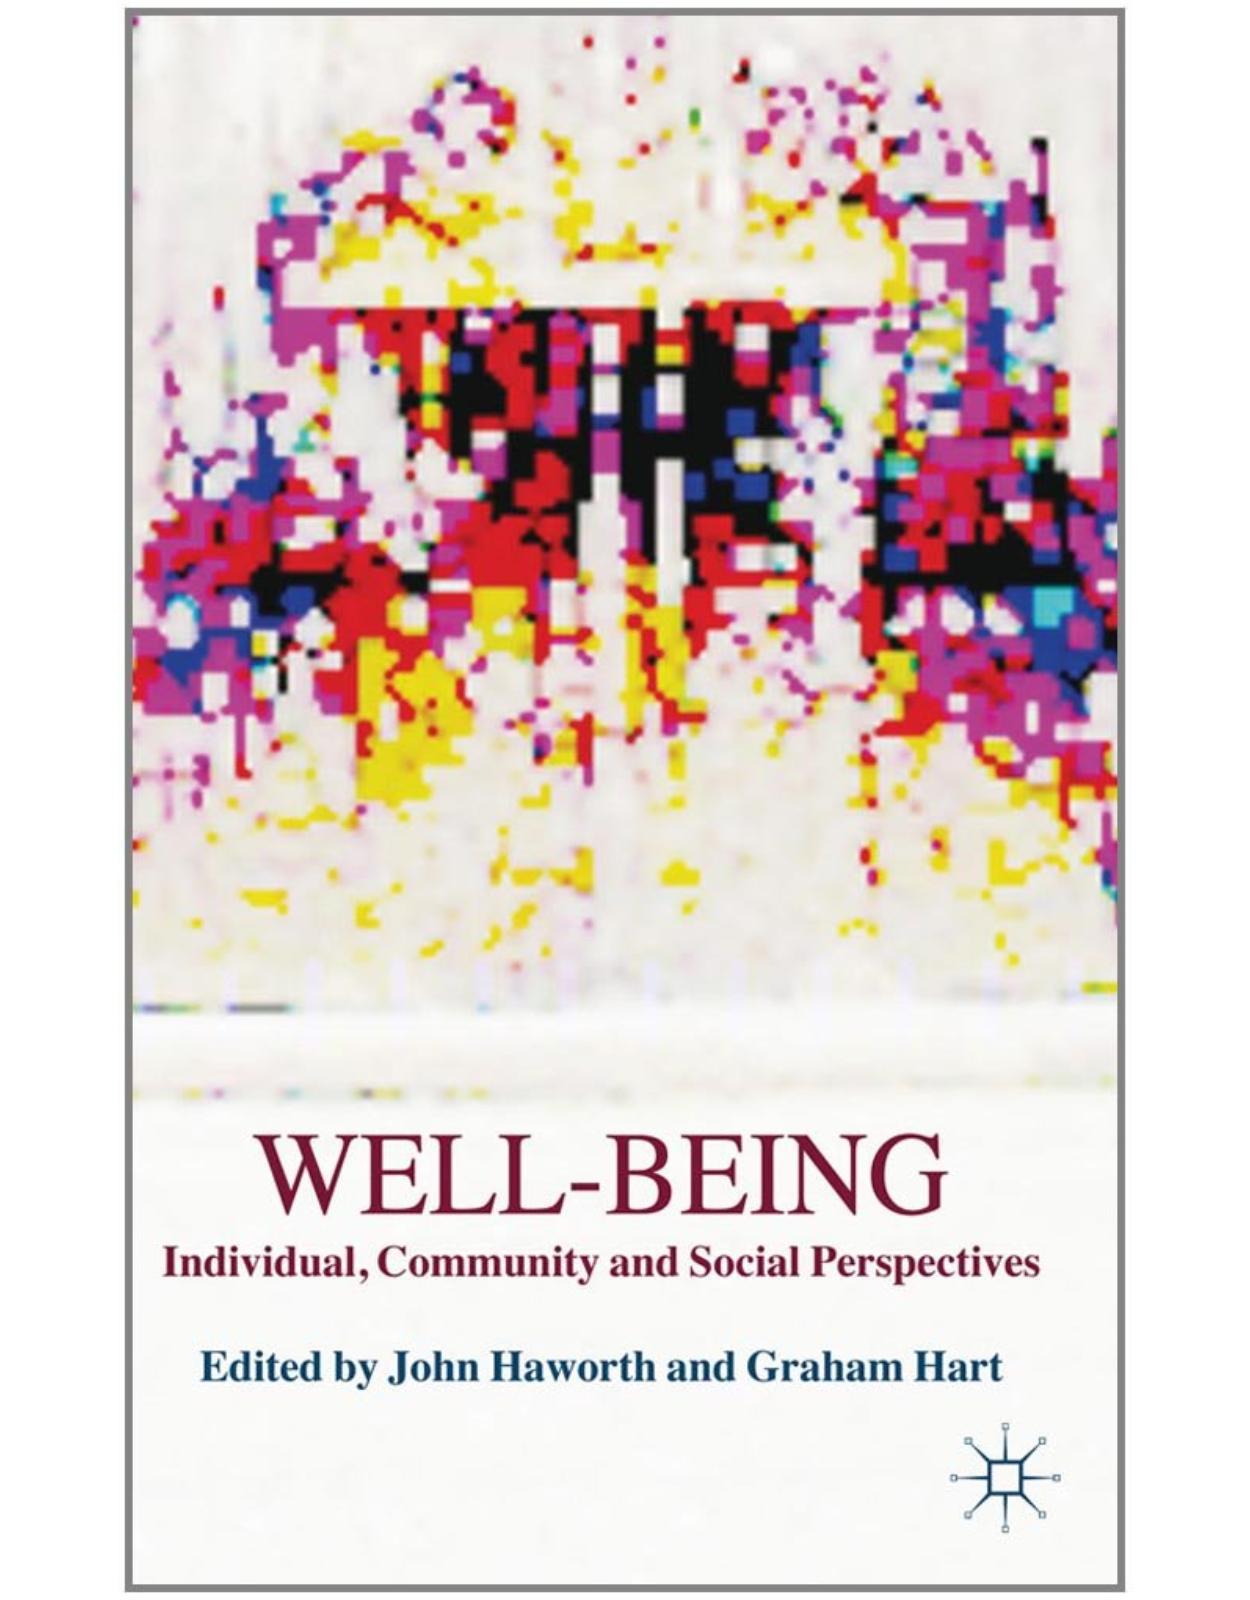 Well-Being: Individual, Community and Social Perspectives